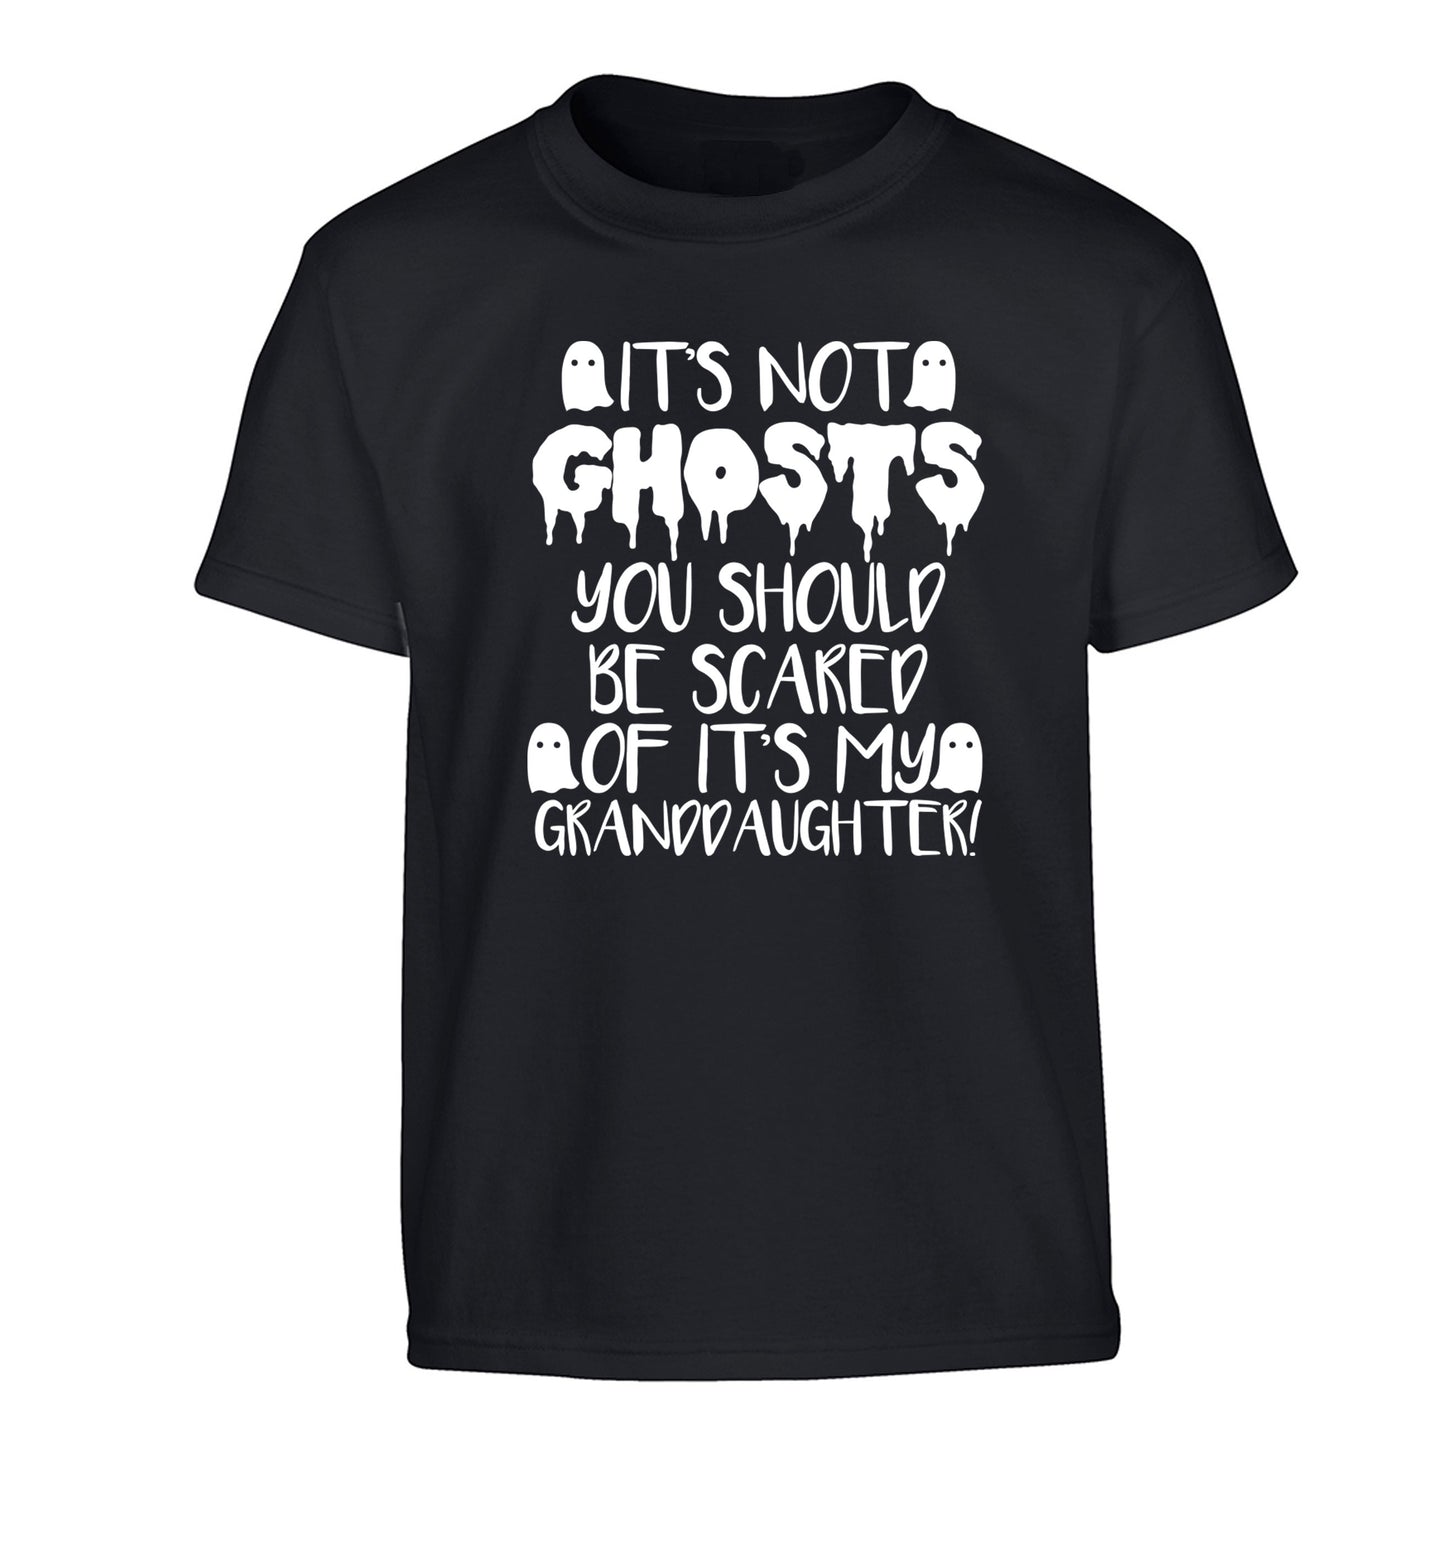 It's not ghosts you should be scared of it's my granddaughter! Children's black Tshirt 12-14 Years